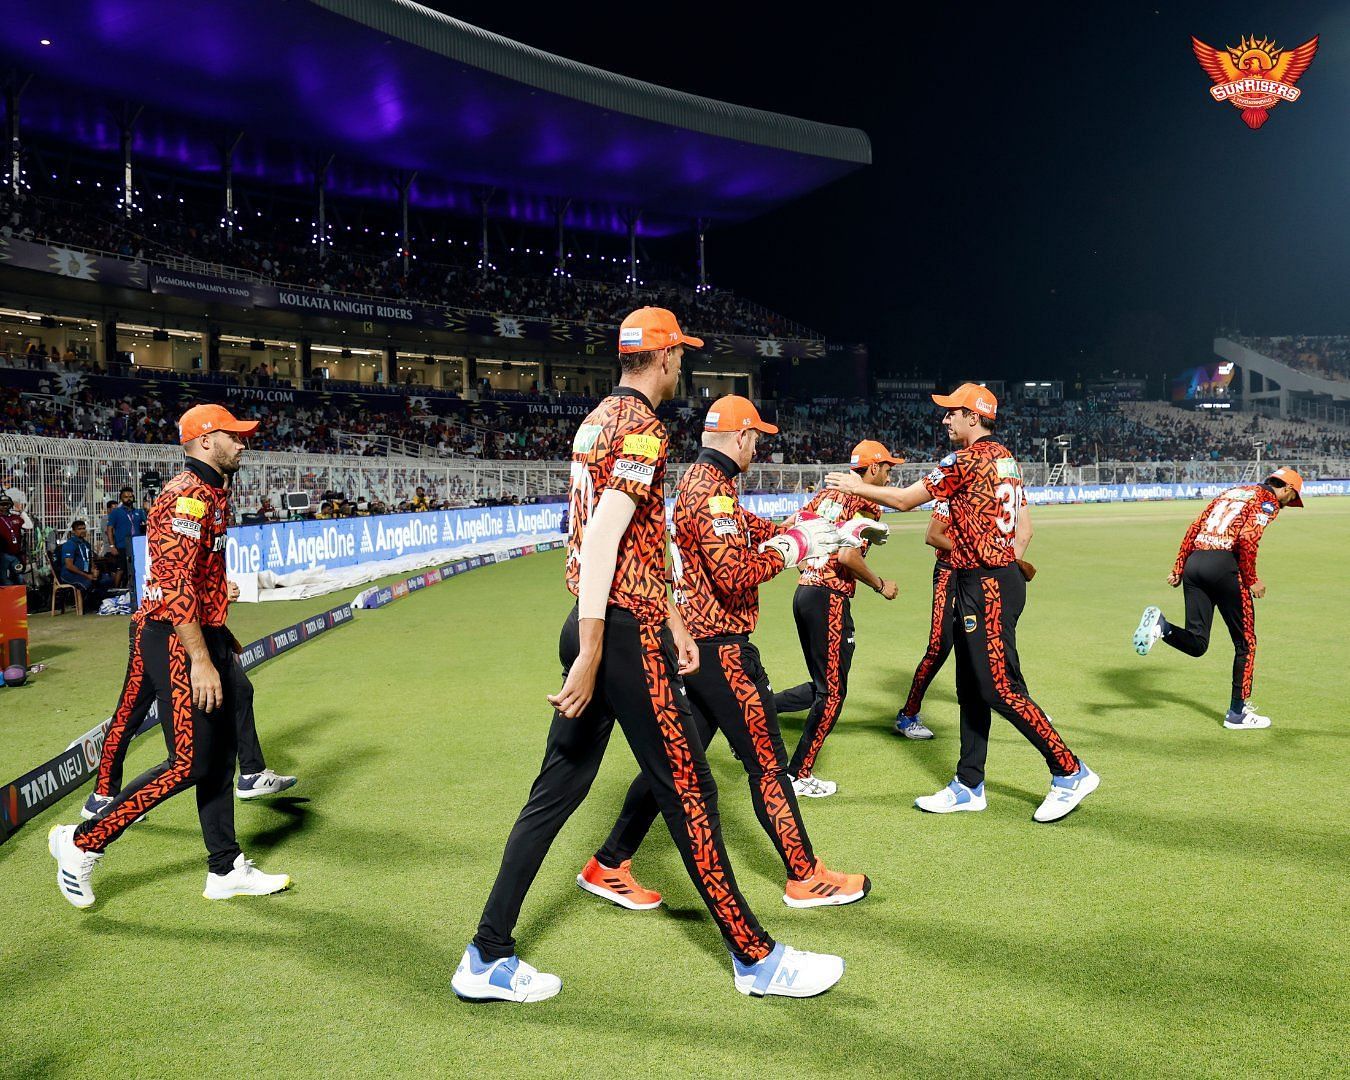 SRH taking to the field against KKR on Saturday. [SRH]